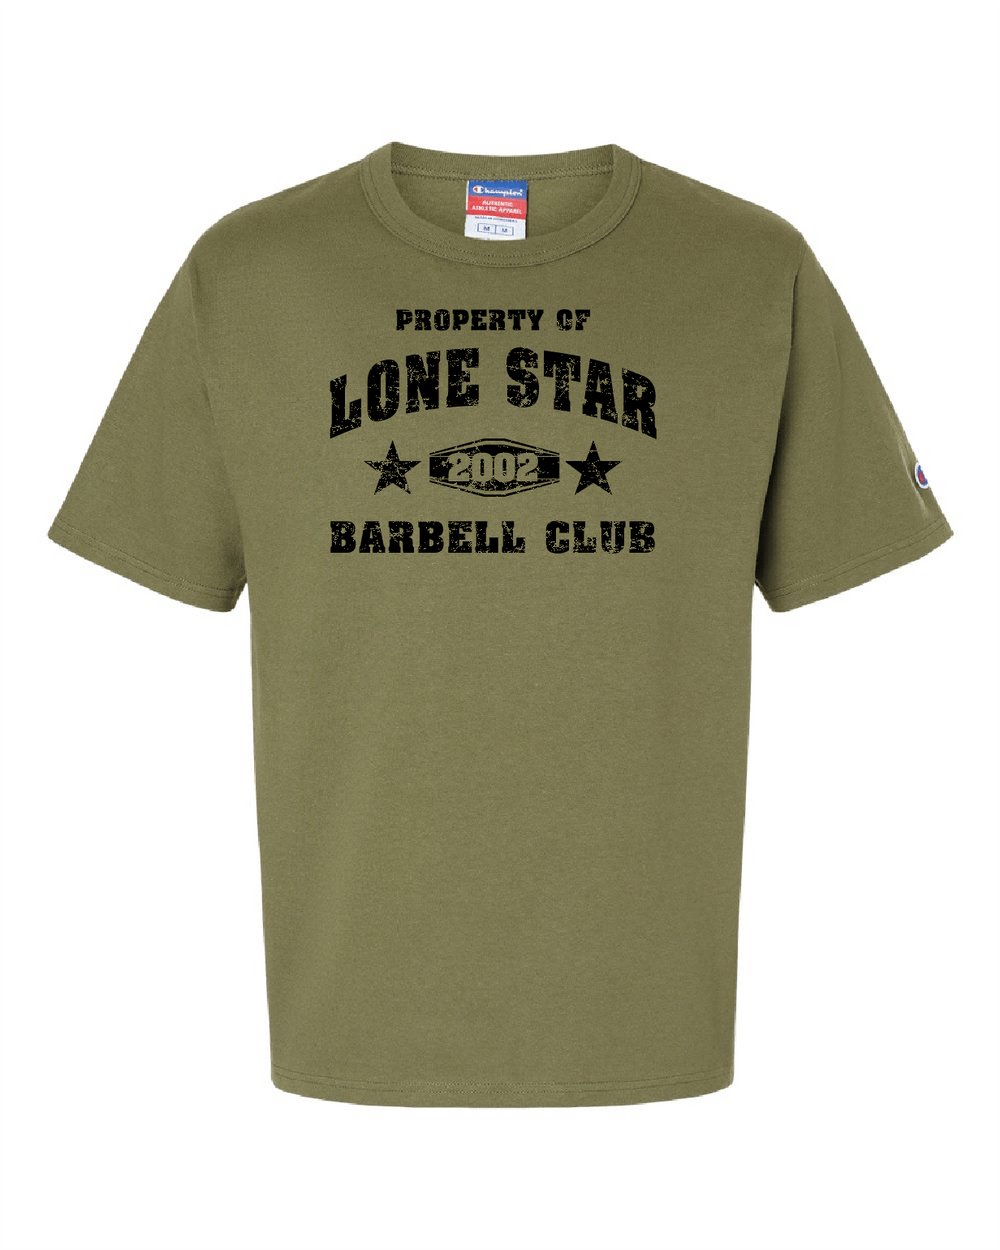 Lone Star Barbell Club variable Medium / Military Green Heritage Property Of Lone Star Barbell Pump Cover